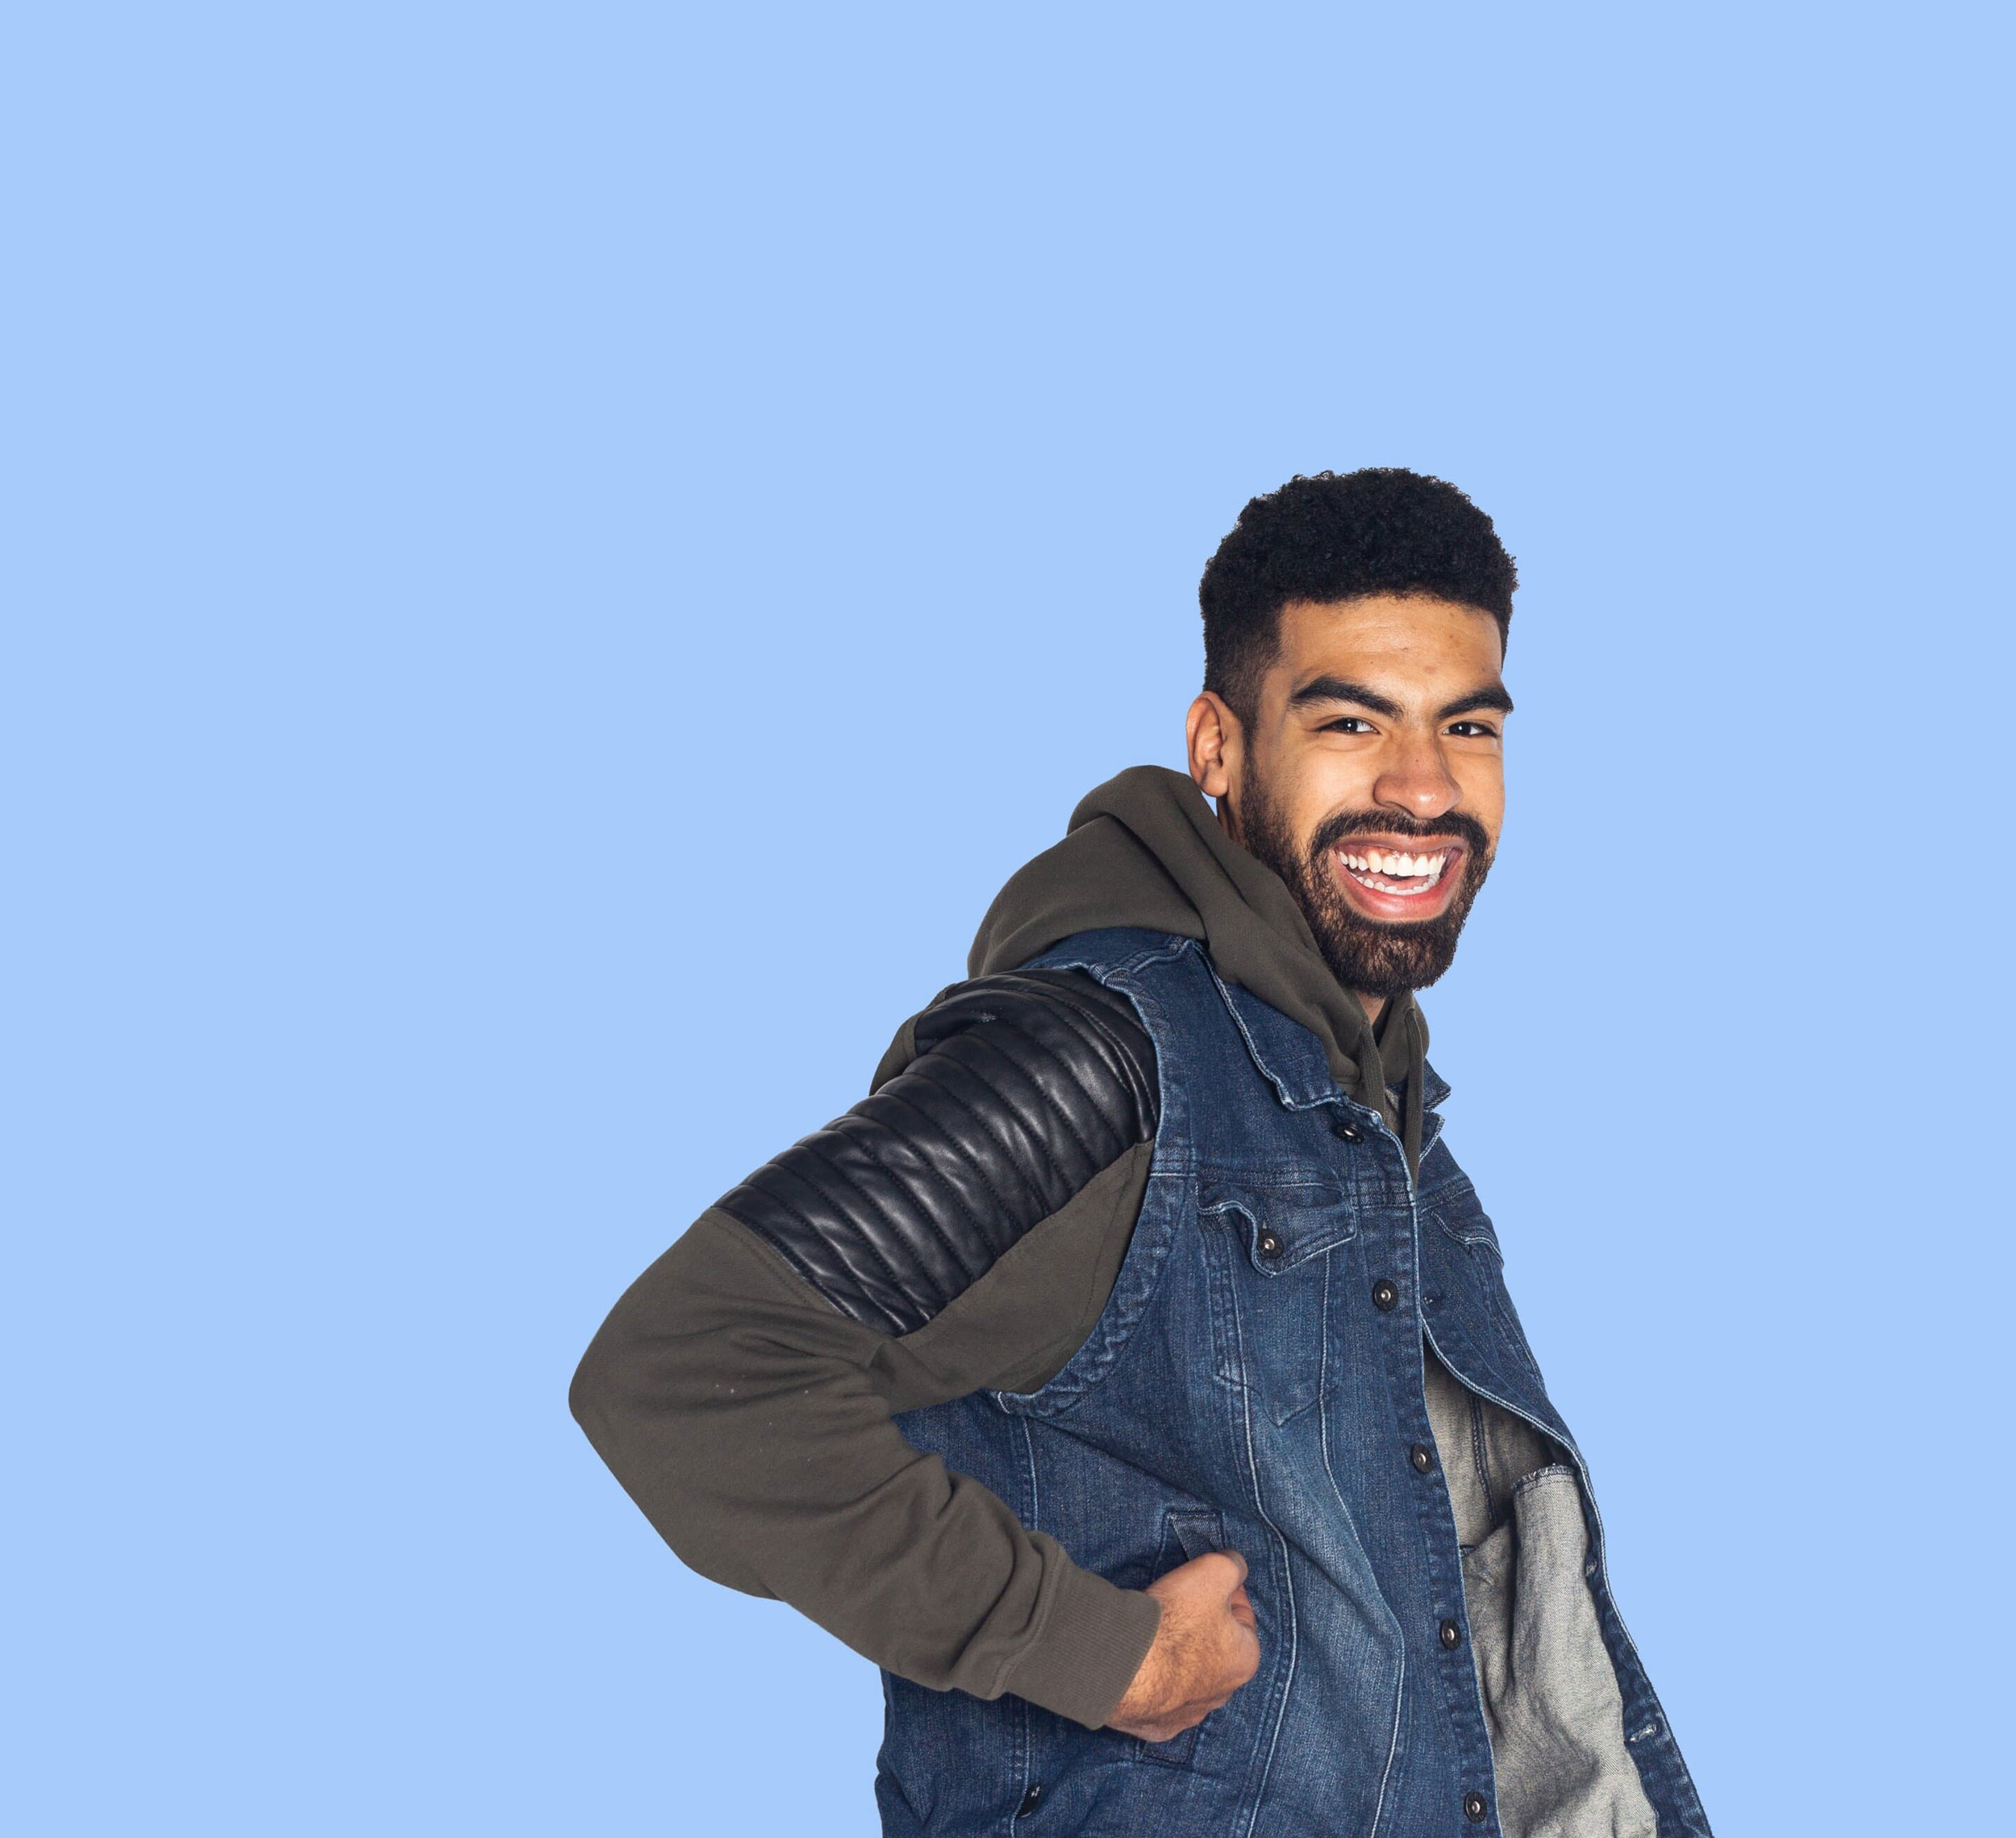 A young man smiling against a blue background wearing a hoodie and denim jacket